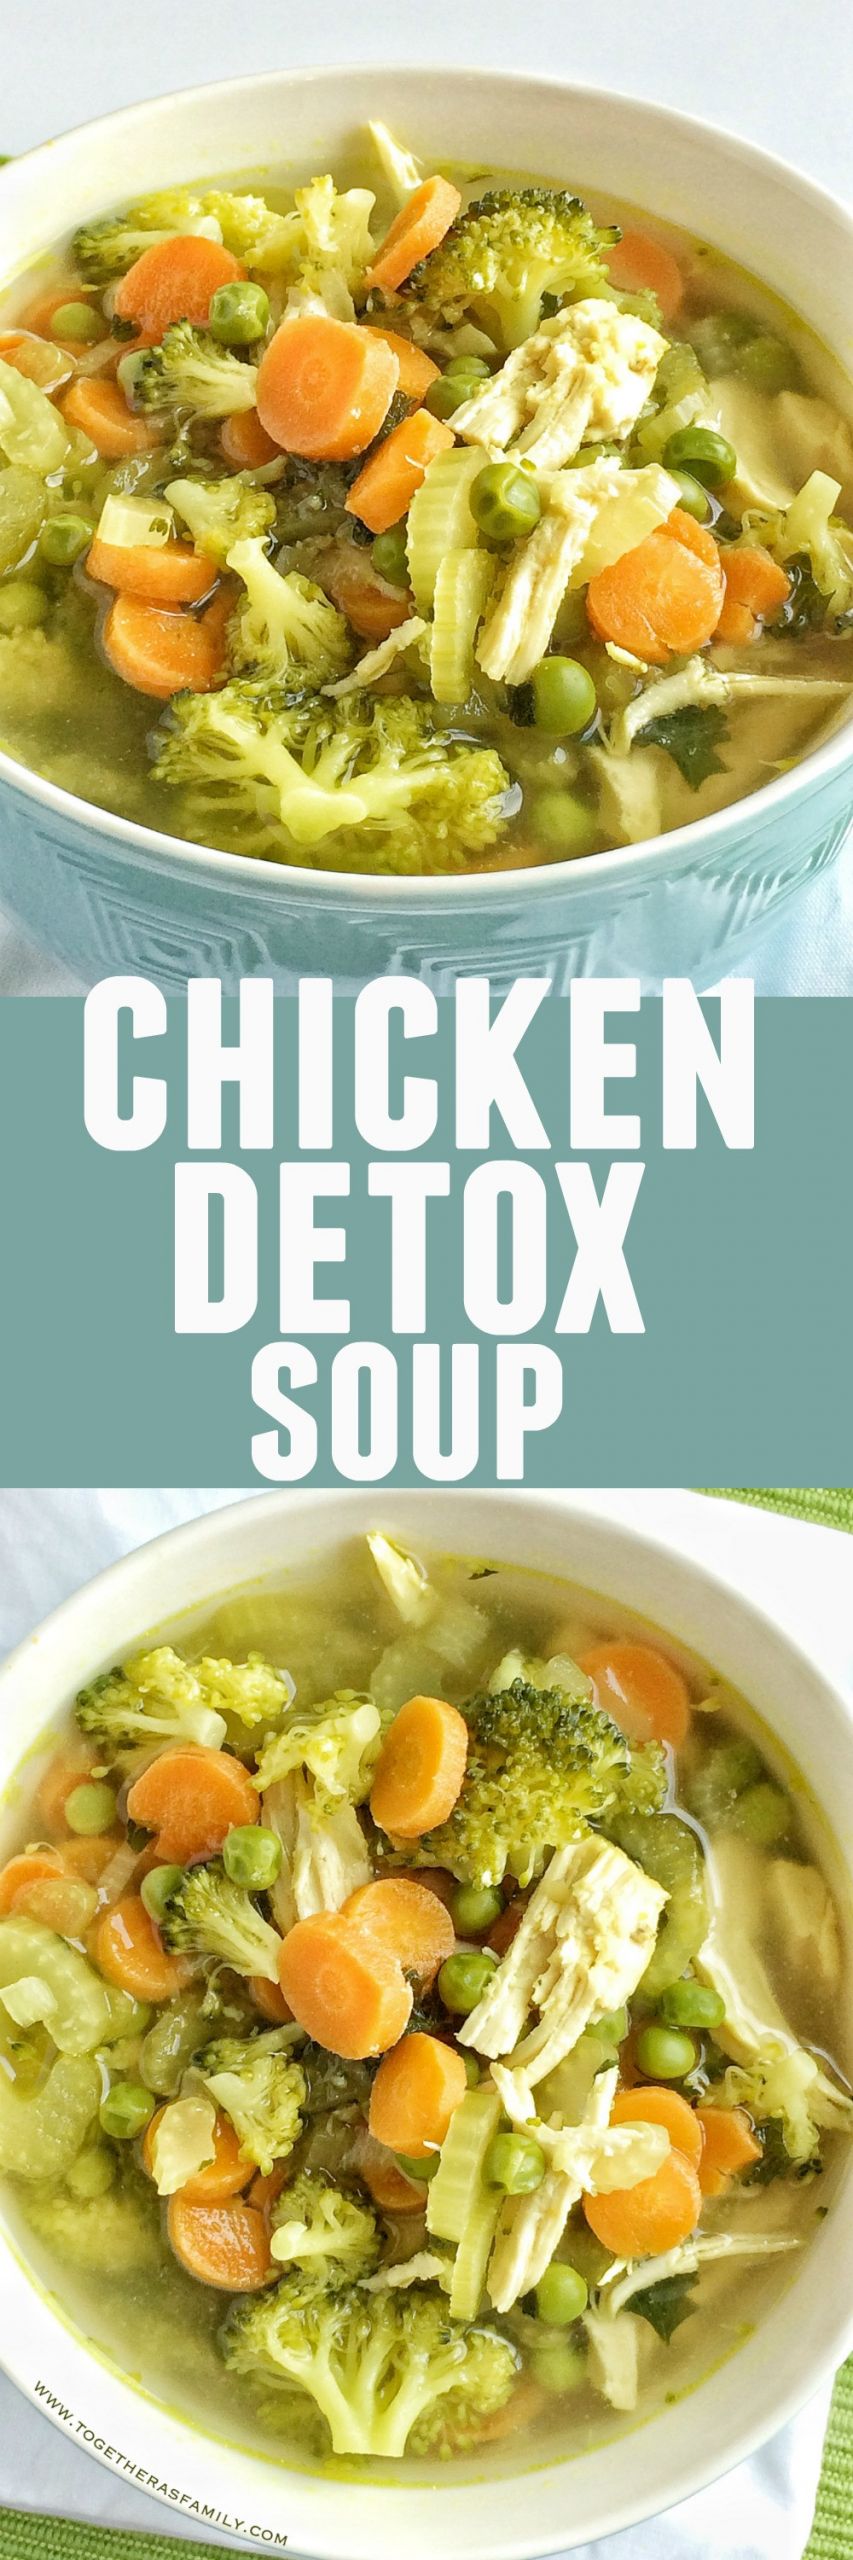 Low Fat Chicken Dinner Recipes
 Chicken Detox Soup To her as Family